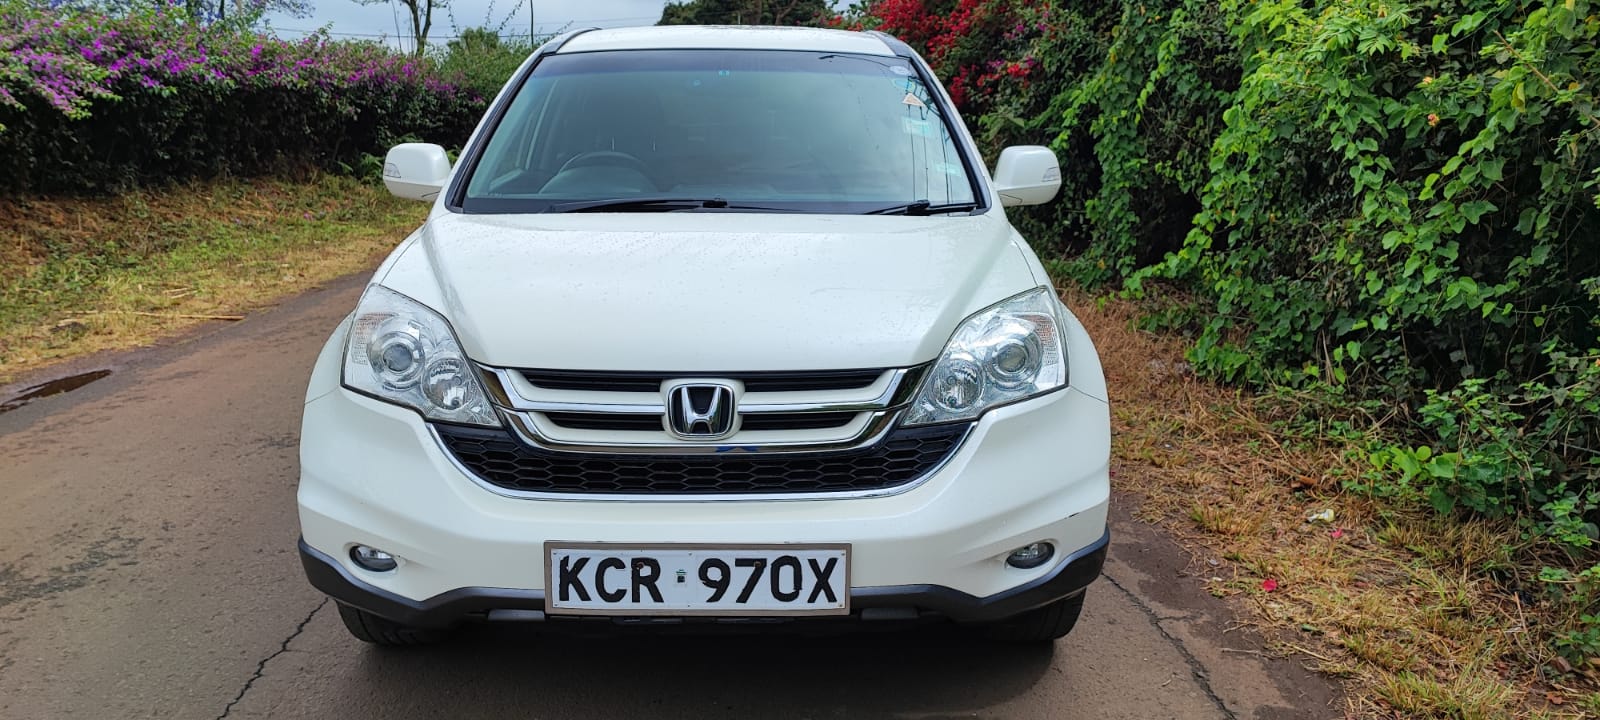 Honda CR-V 2011 Clean You Pay 20% Deposit Trade in OK as NEW